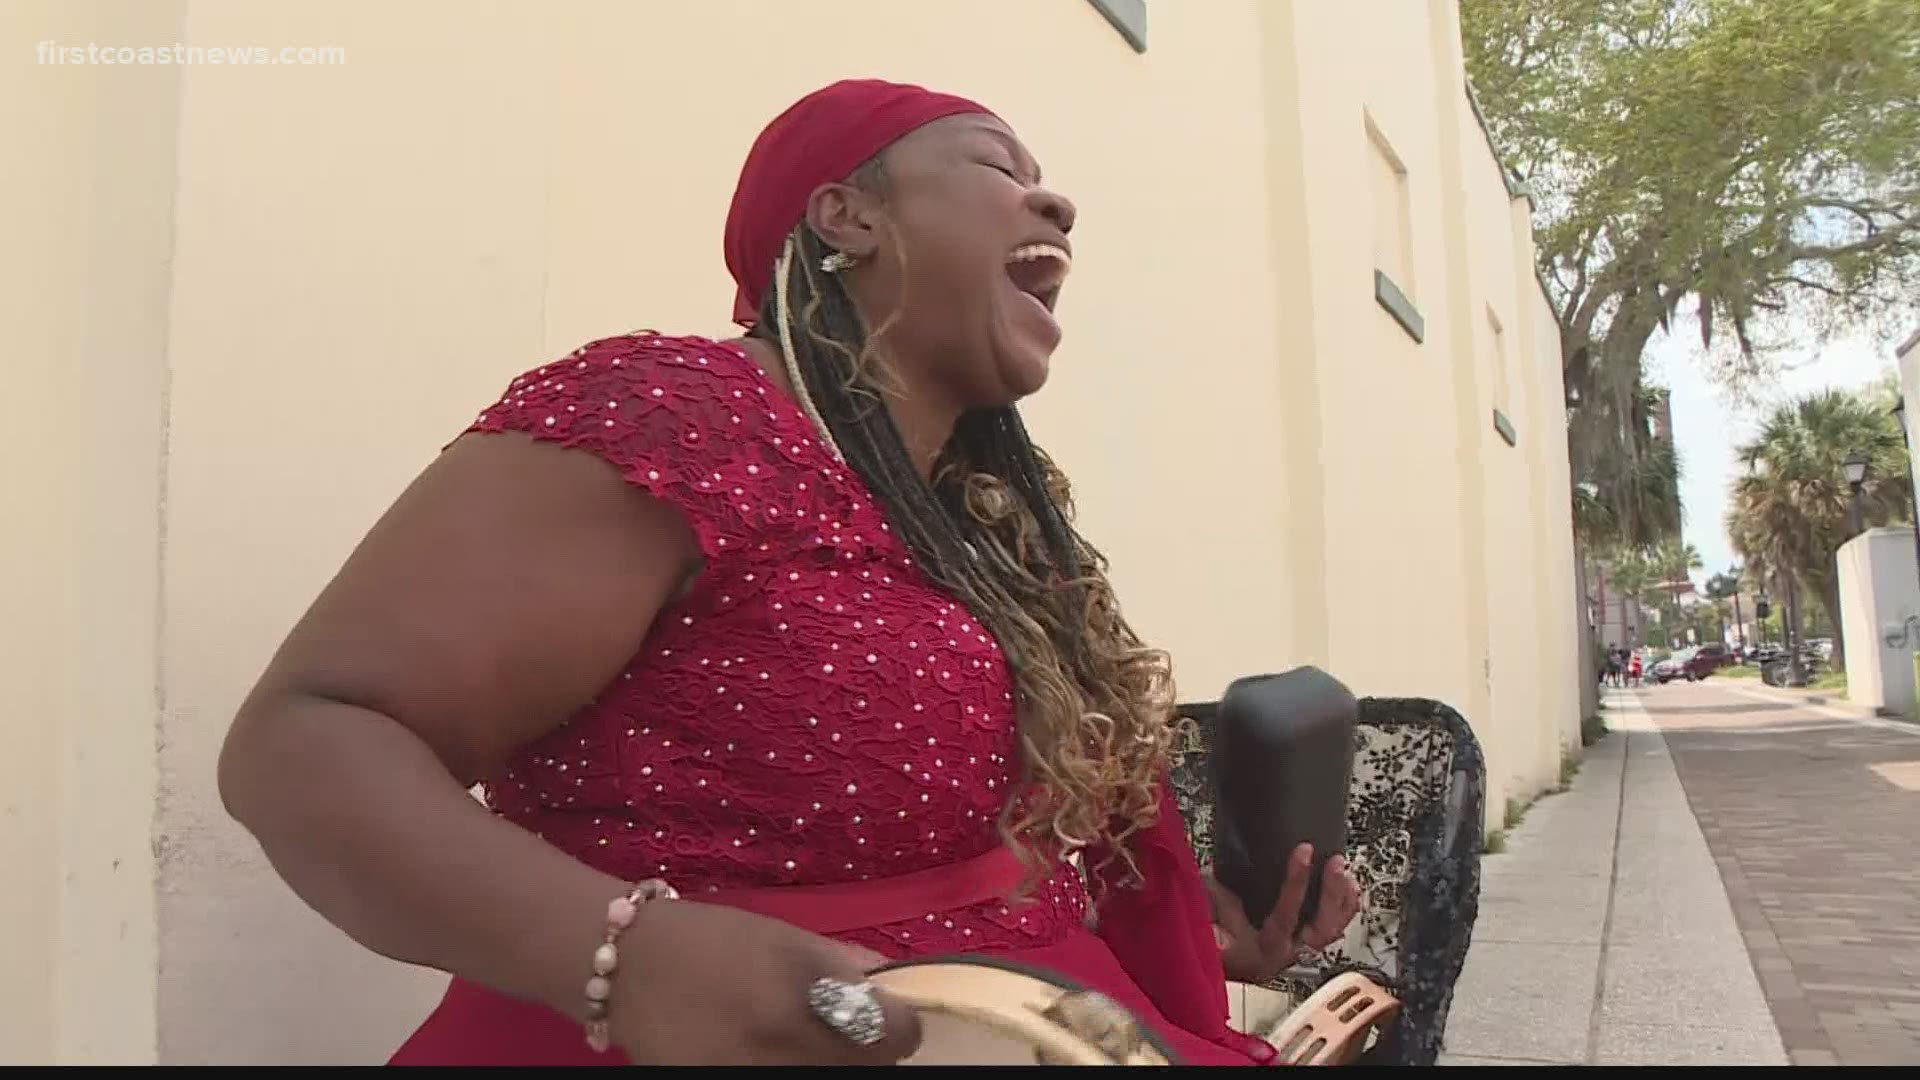 Meshela Lee's voice is captivating, as she sings to visitors and locals on St. Georgia Street.